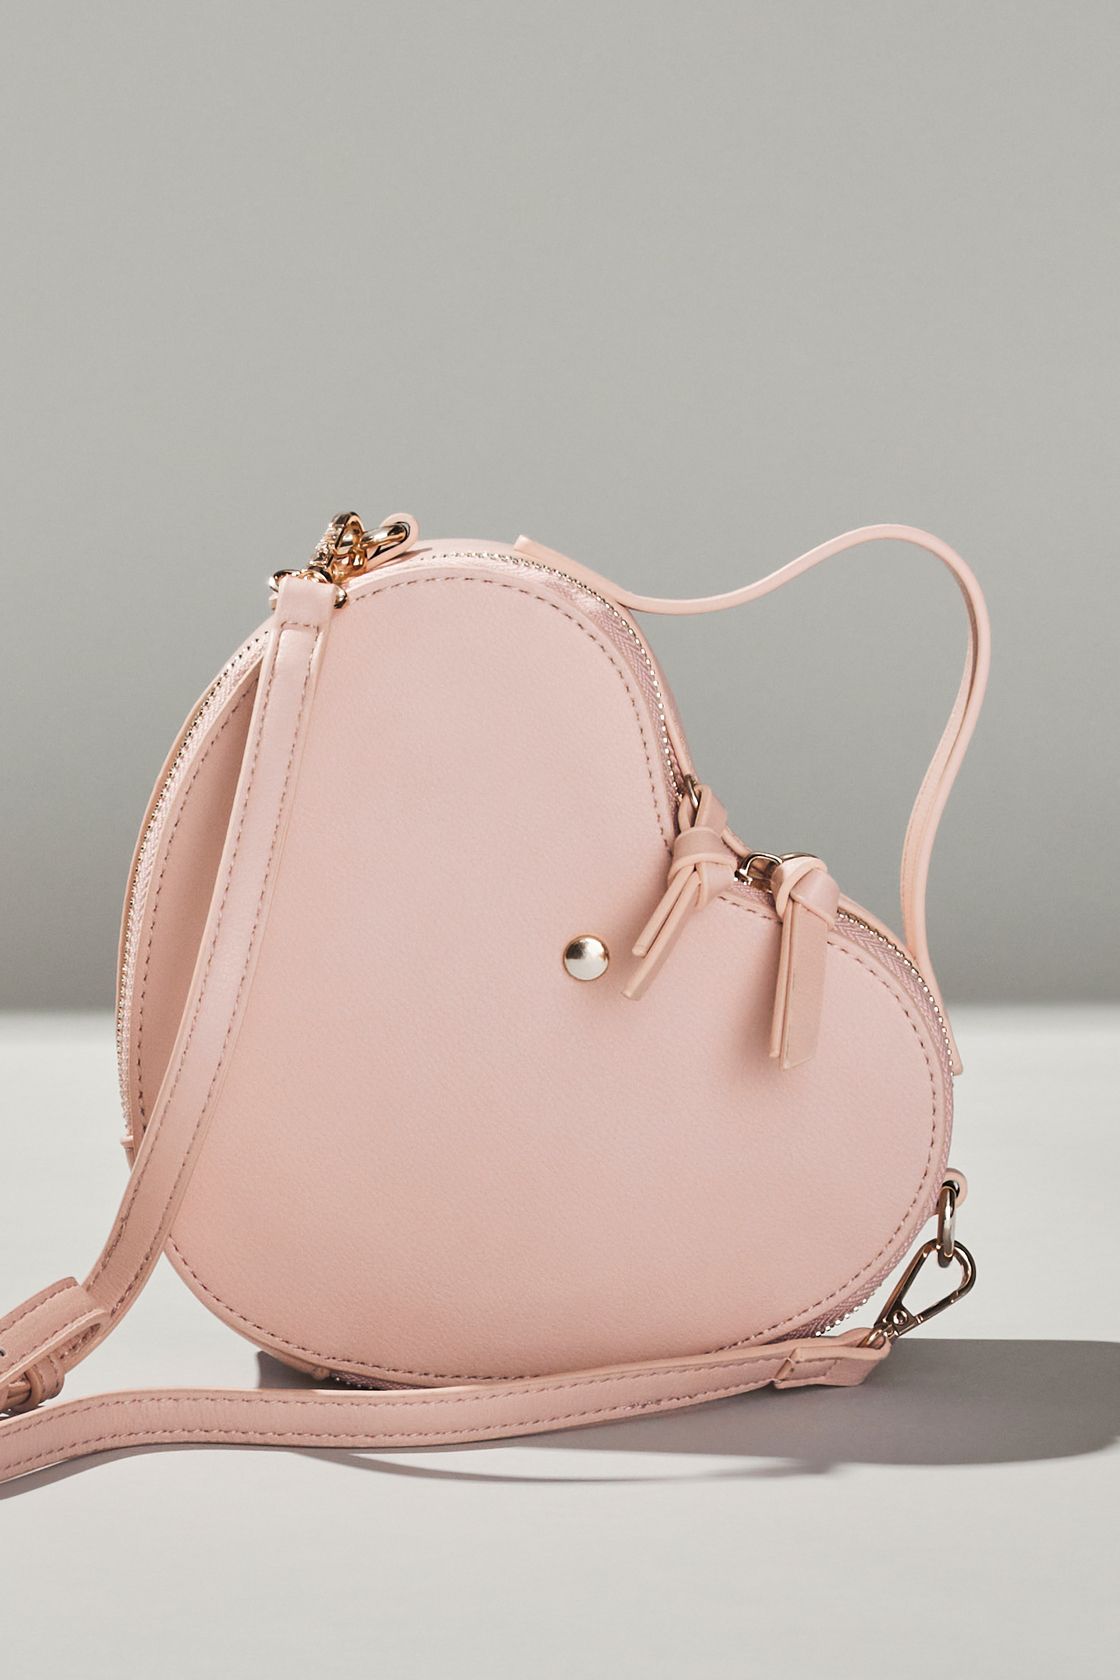 Sweetheart Crossbody Bag in Blush | Altar'd State | Altar'd State